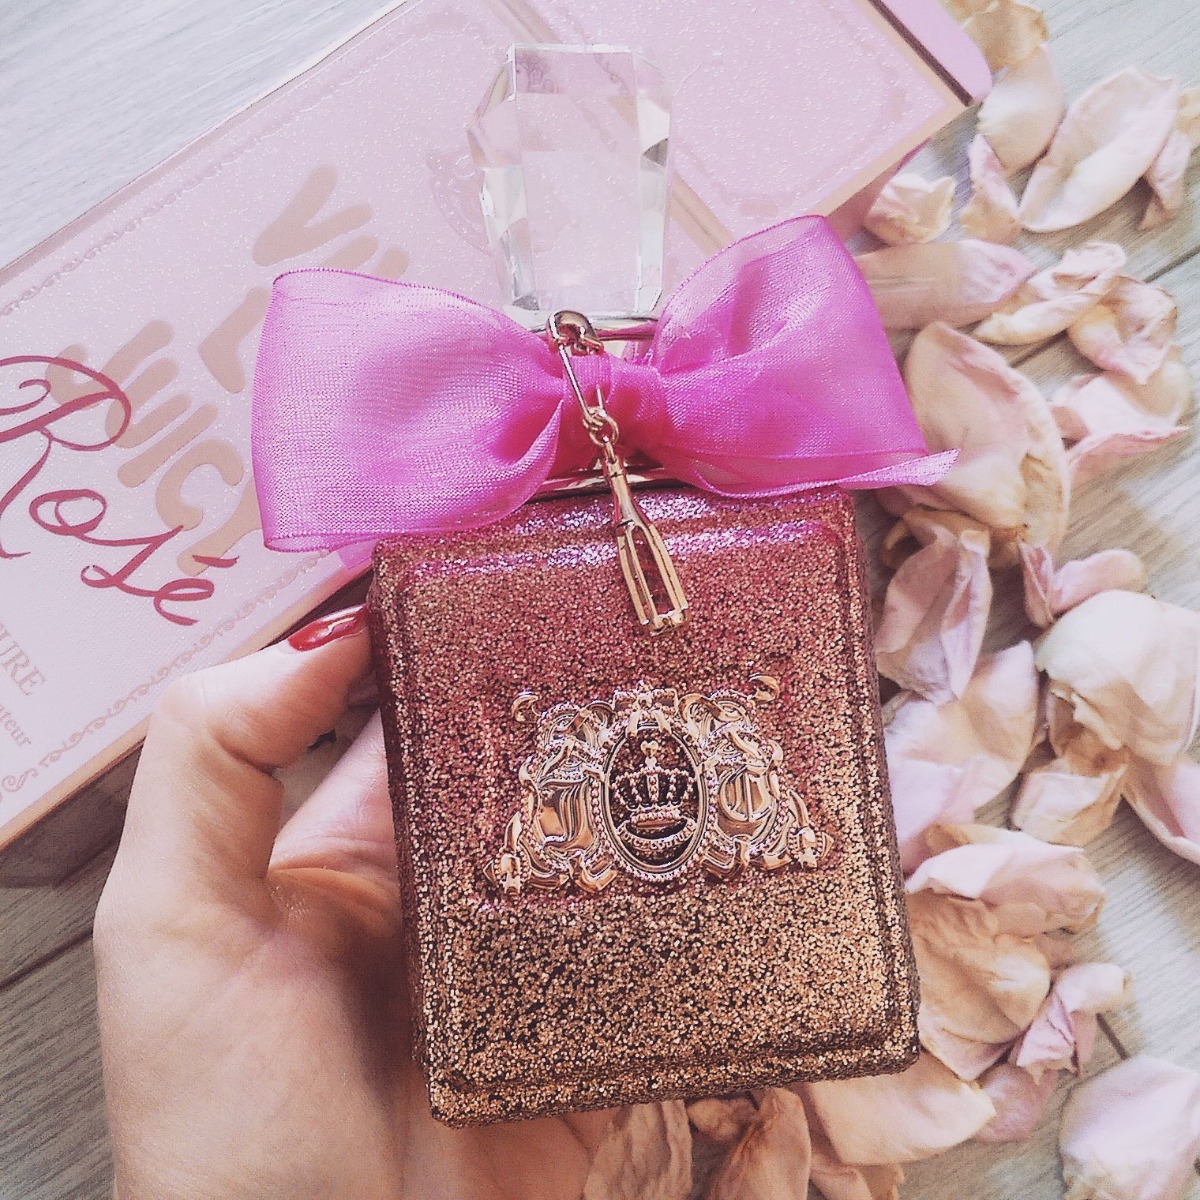 Nước hoa Juicy Couture Viva La Juicy EDP & Gold Couture Roller Ball